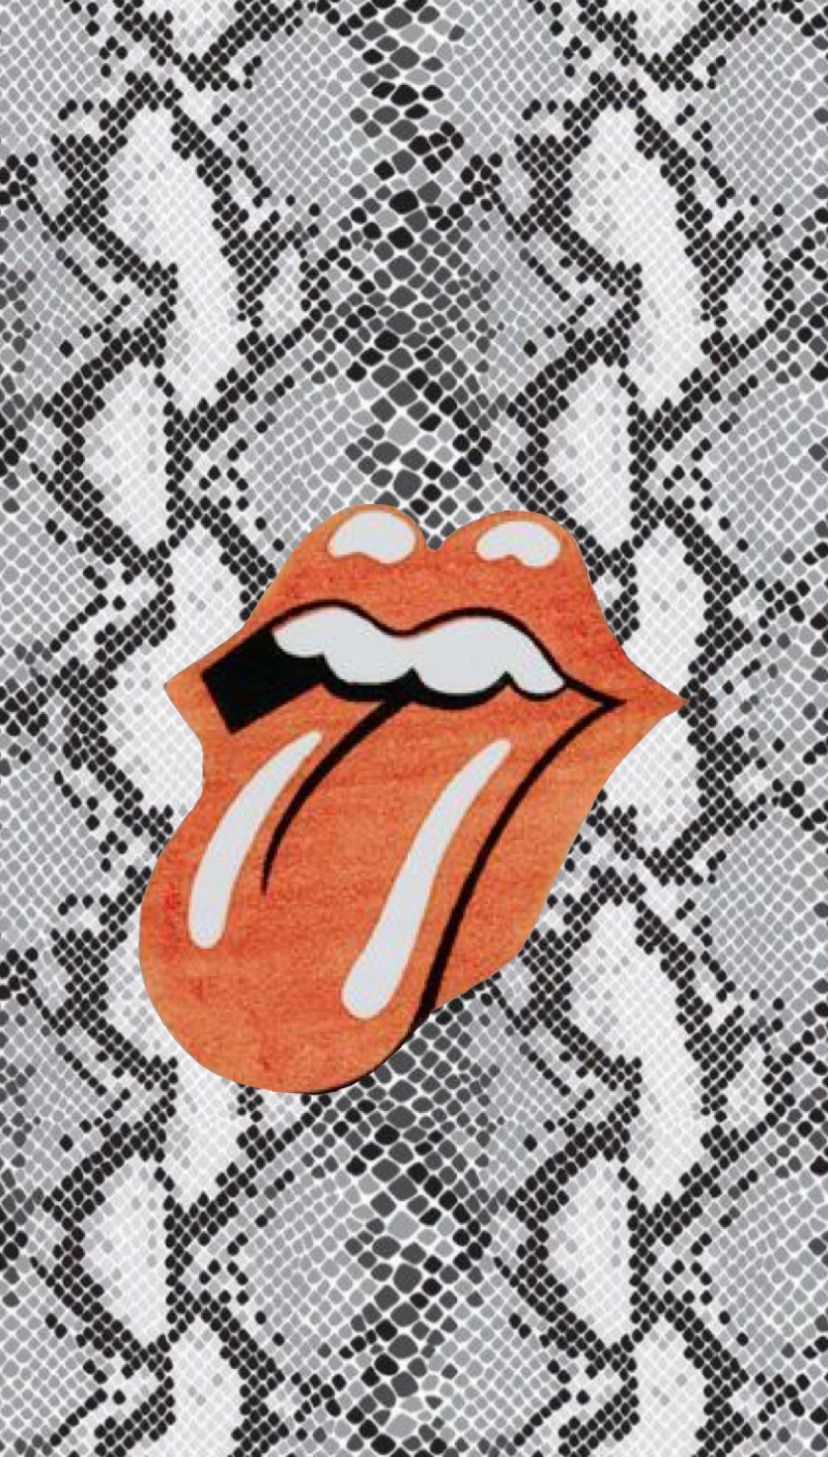 Rolling Stones background. Cute patterns wallpaper, Preppy wallpaper, iPhone wallpaper pattern